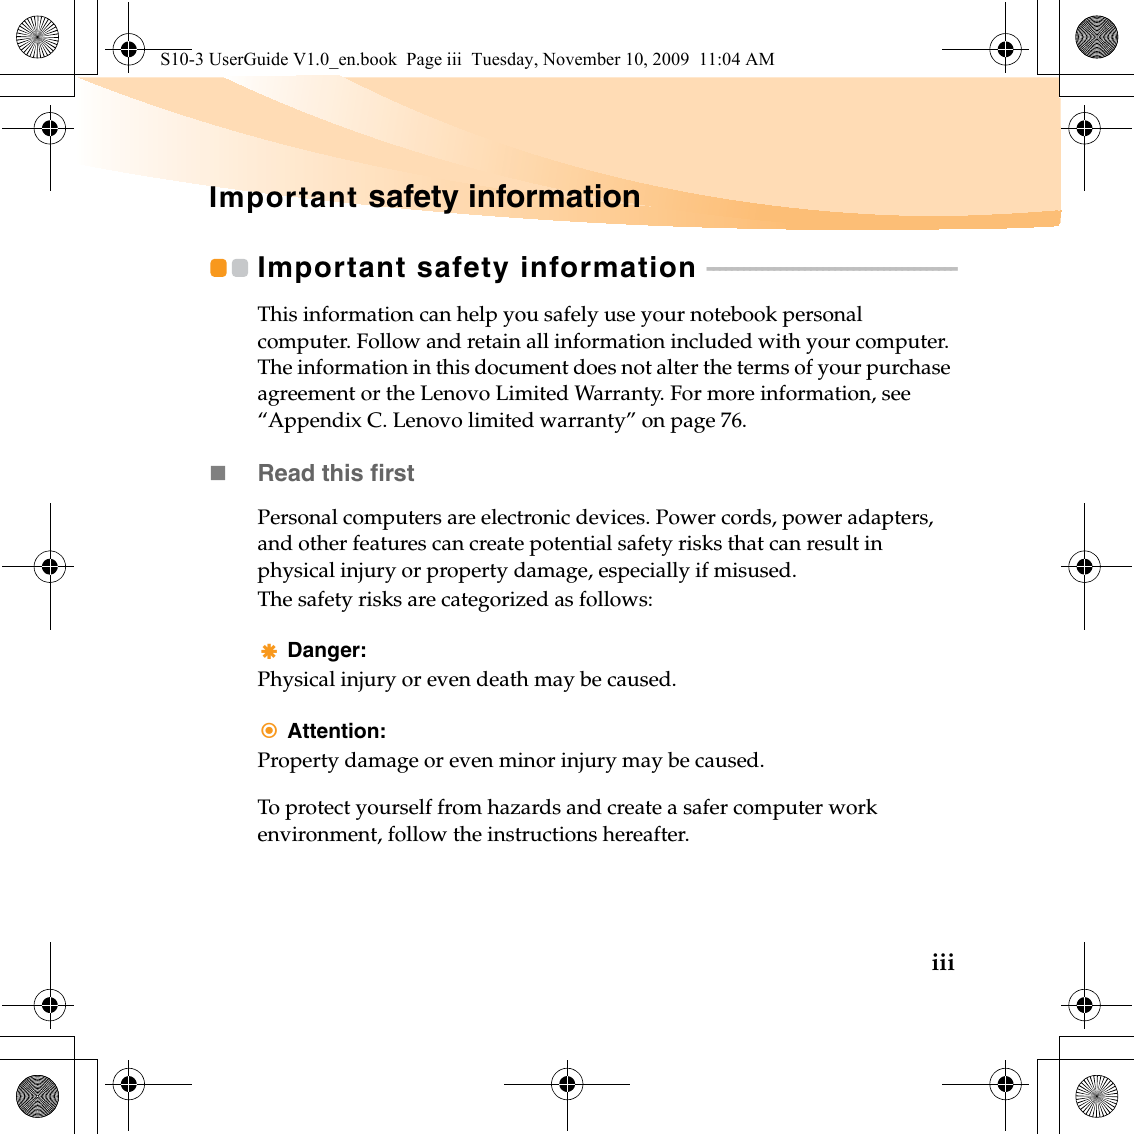 iiiImportant safety informationImportant safety information  - - - - - - - - - - - - - - - - - - - - - - - - - - - - - - - - - - - - - - - - -This information can help you safely use your notebook personal computer. Follow and retain all information included with your computer. The information in this document does not alter the terms of your purchase agreement or the Lenovo Limited Warranty. For more information, see “Appendix C. Lenovo limited warranty” on page 76.Read this firstPersonal computers are electronic devices. Power cords, power adapters, and other features can create potential safety risks that can result in physical injury or property damage, especially if misused.The safety risks are categorized as follows:Danger:Physical injury or even death may be caused.Attention:Property damage or even minor injury may be caused.To protect yourself from hazards and create a safer computer work environment, follow the instructions hereafter.S10-3 UserGuide V1.0_en.book  Page iii  Tuesday, November 10, 2009  11:04 AM